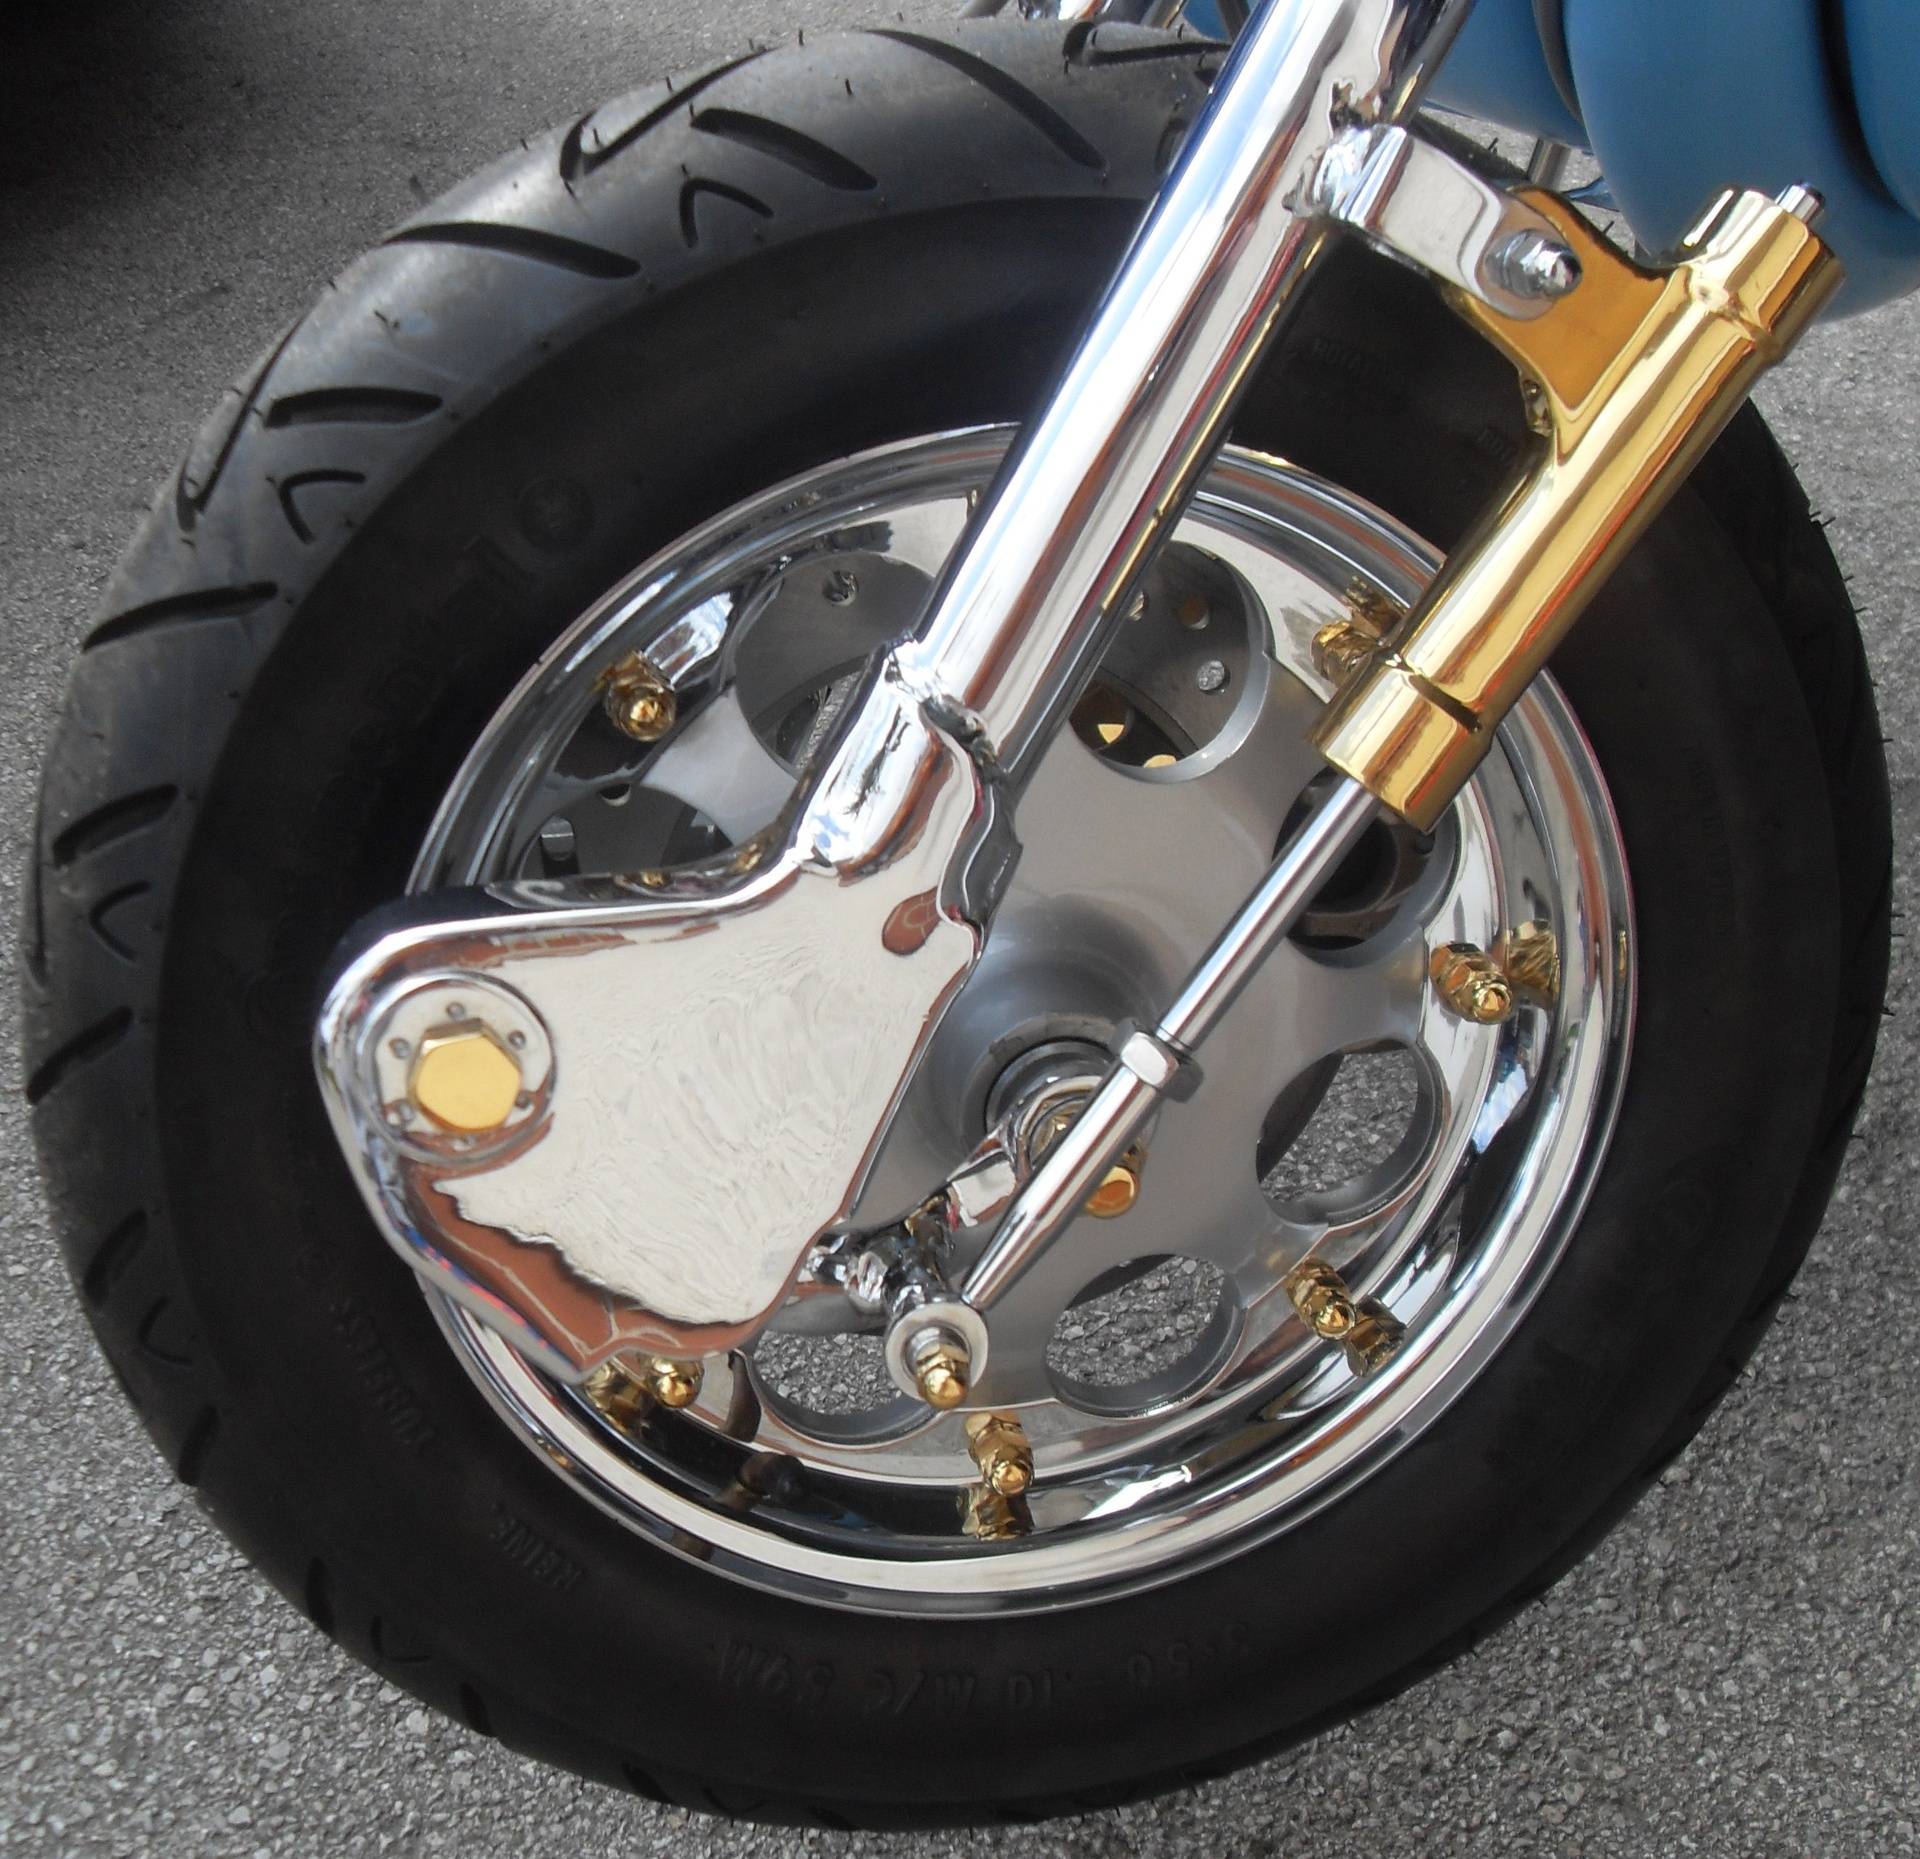 Gold plated dampers